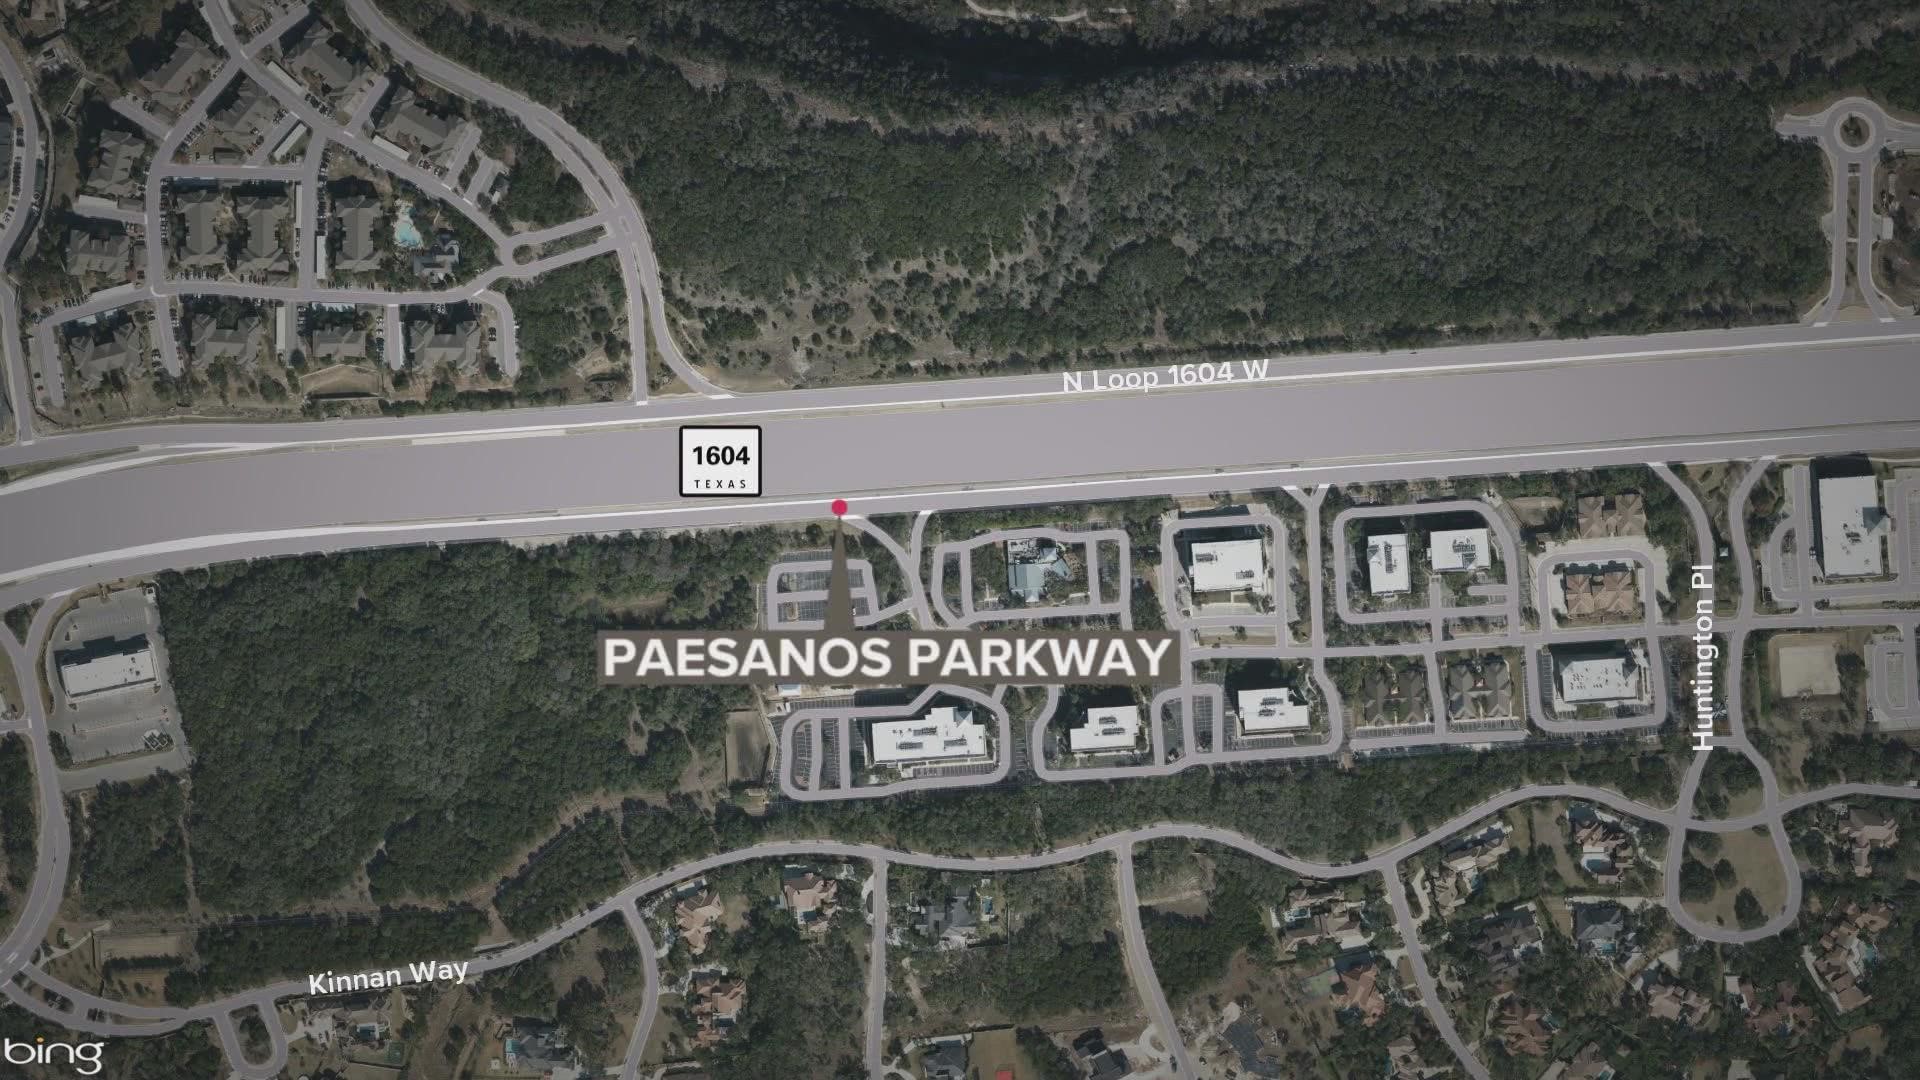 It happened early Sunday on Loop 1604 and Paesanos Parkway on the north side of town.